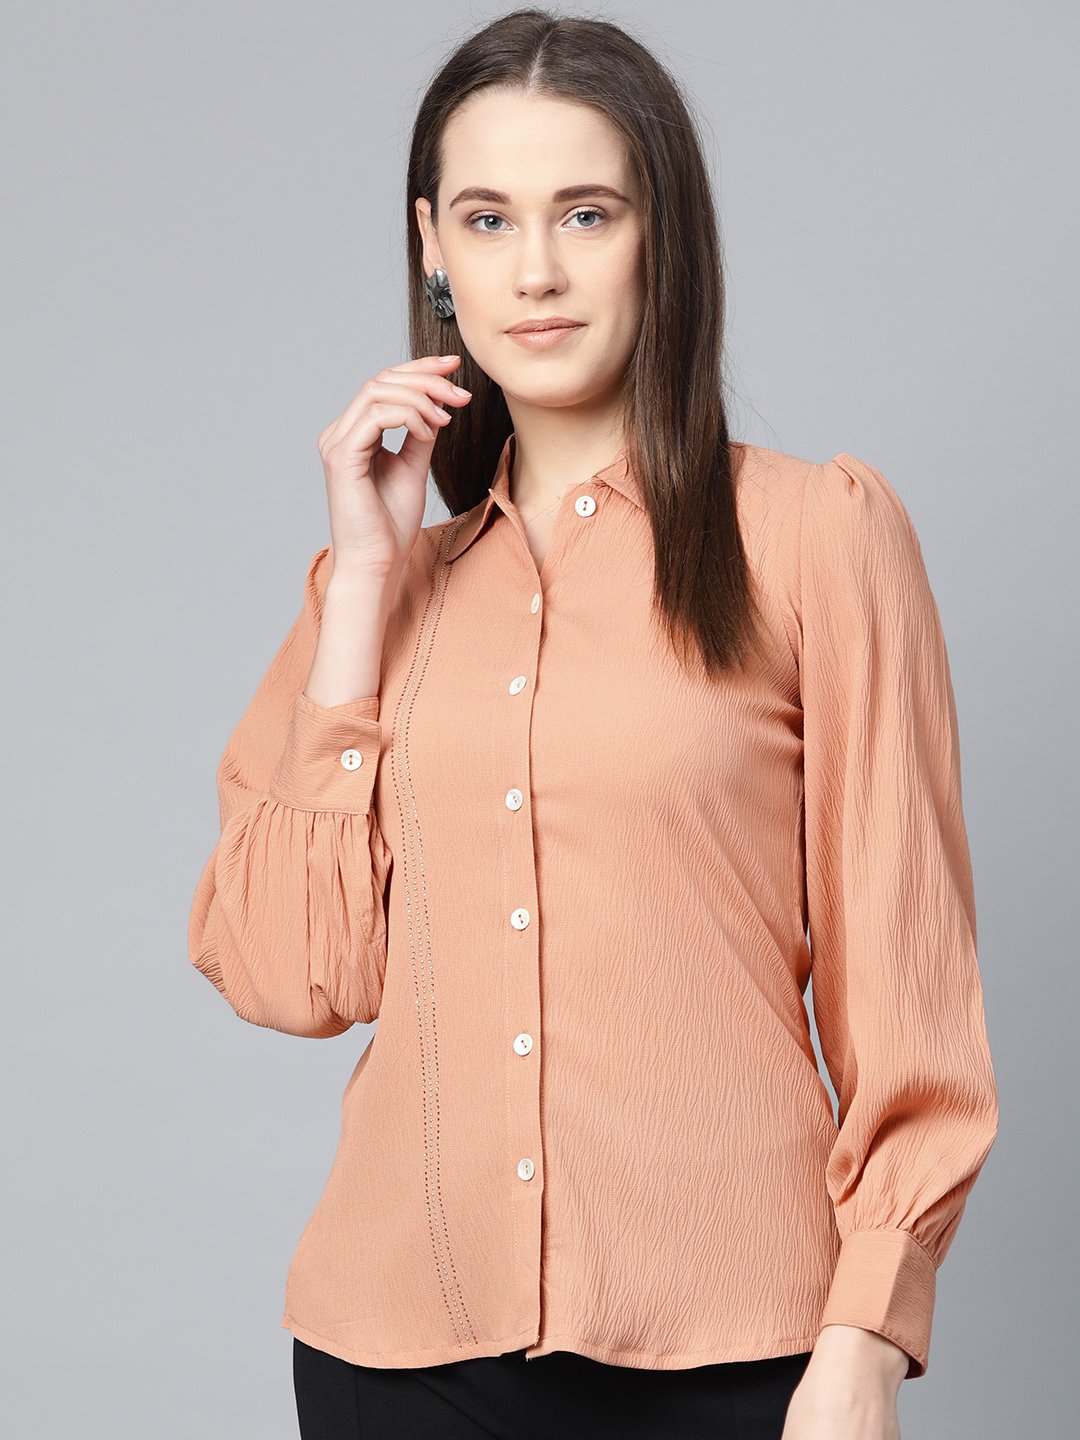 Women's Peach Regular Fit Crinkled Effect Casual Shirt - Jompers